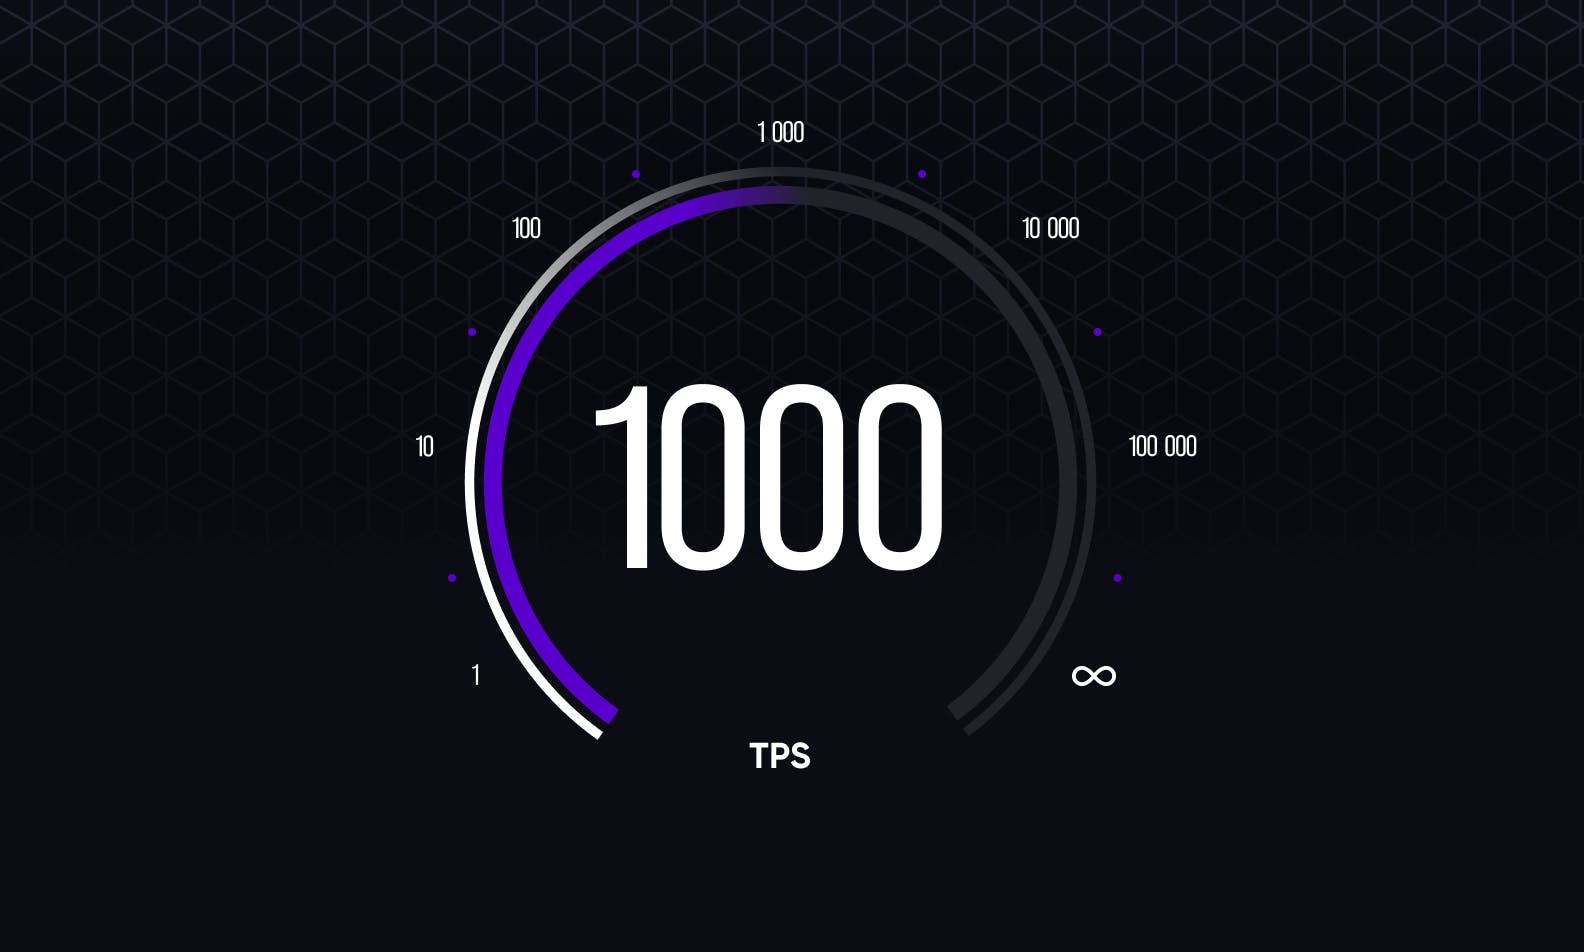 Lightning Node Performance: Exploring the Path to 1000 TPS